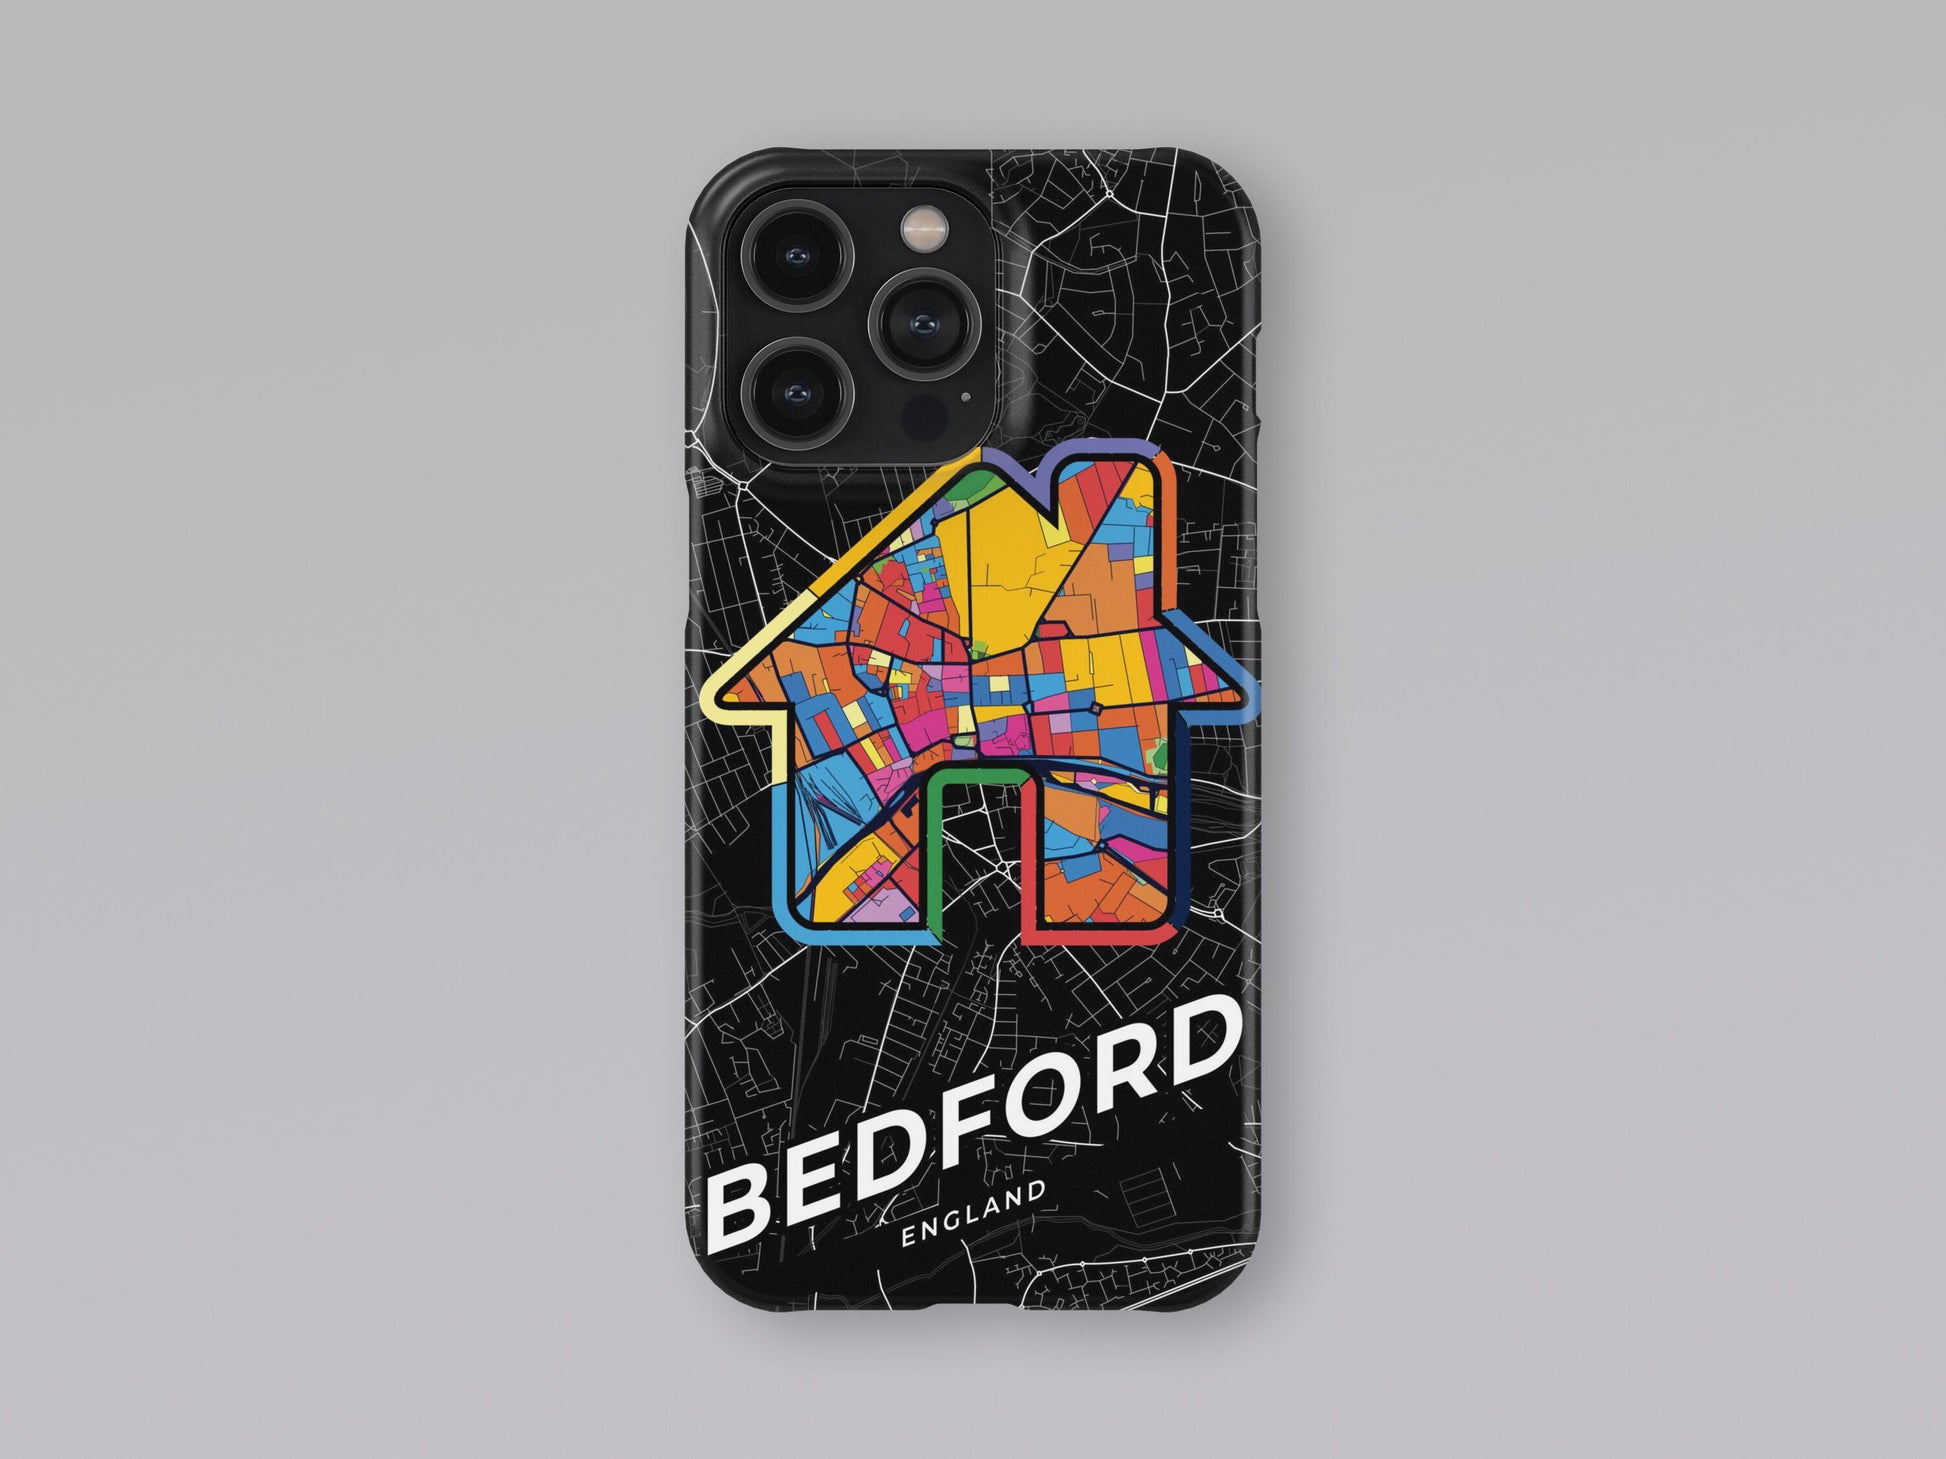 Bedford England slim phone case with colorful icon. Birthday, wedding or housewarming gift. Couple match cases. 3